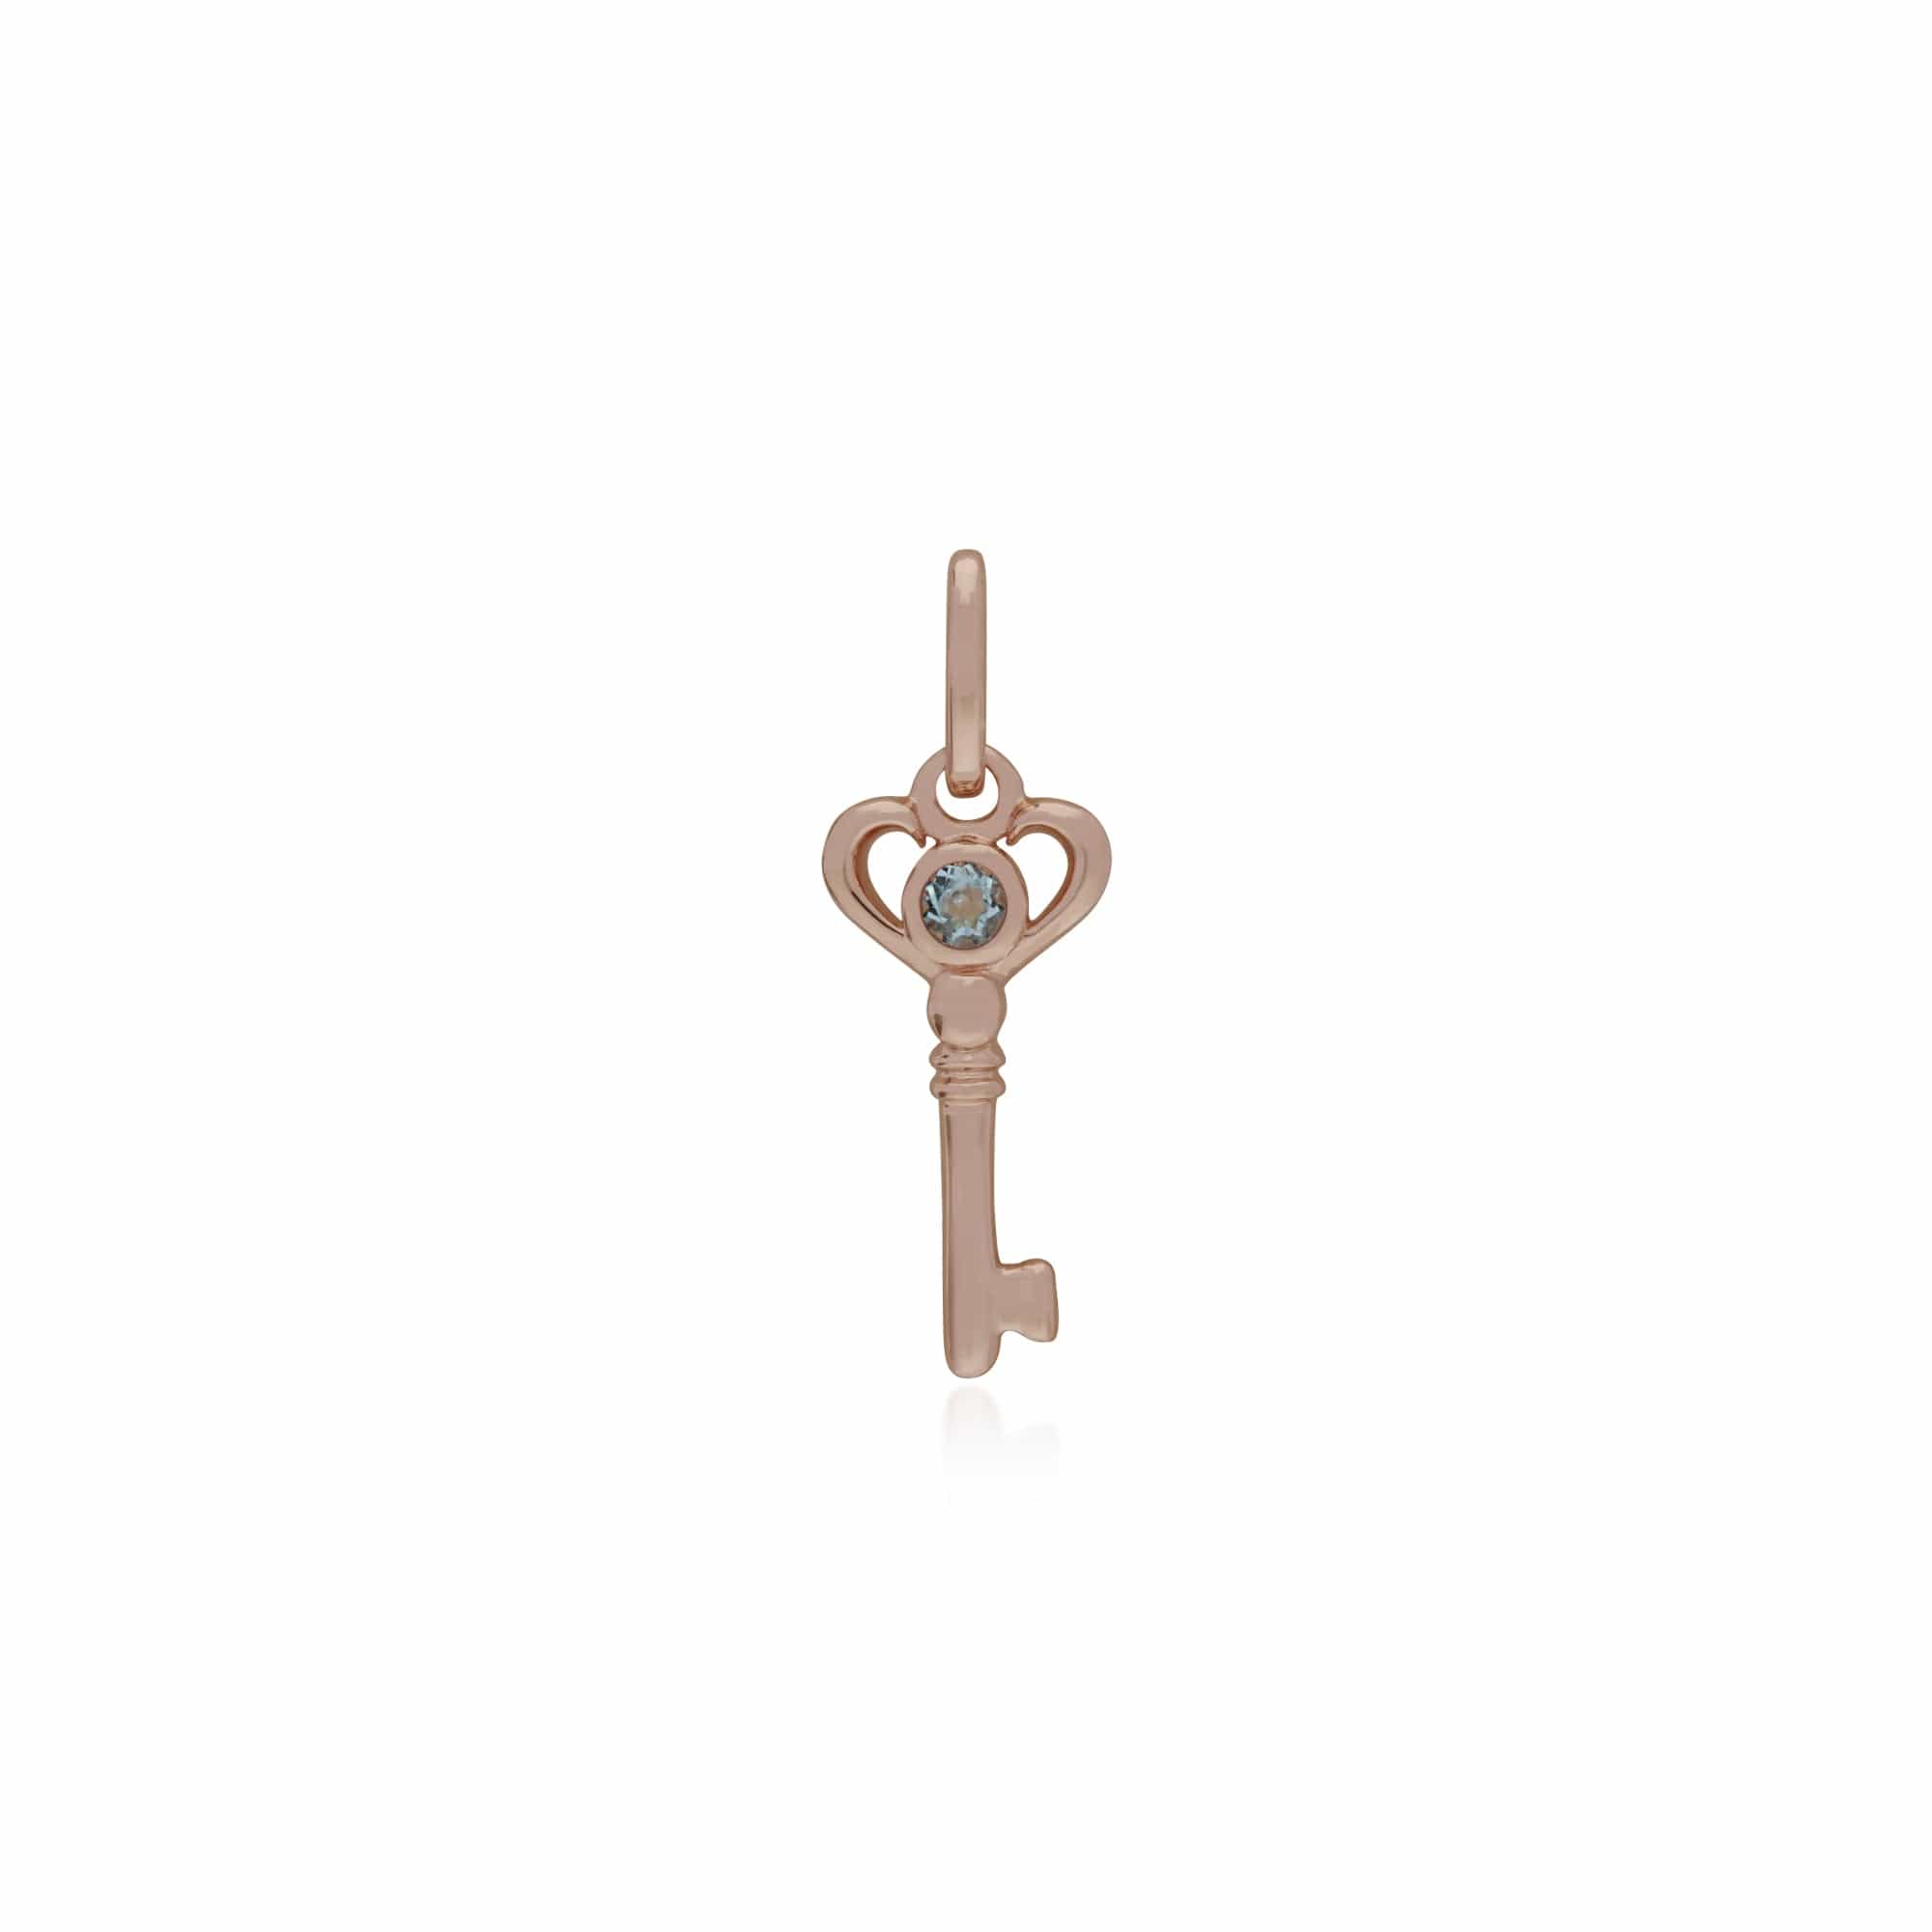 270P026309925-270P026501925 Classic Swirl Heart Lock Pendant & Aquamarine Key Charm in Rose Gold Plated 925 Sterling Silver 2